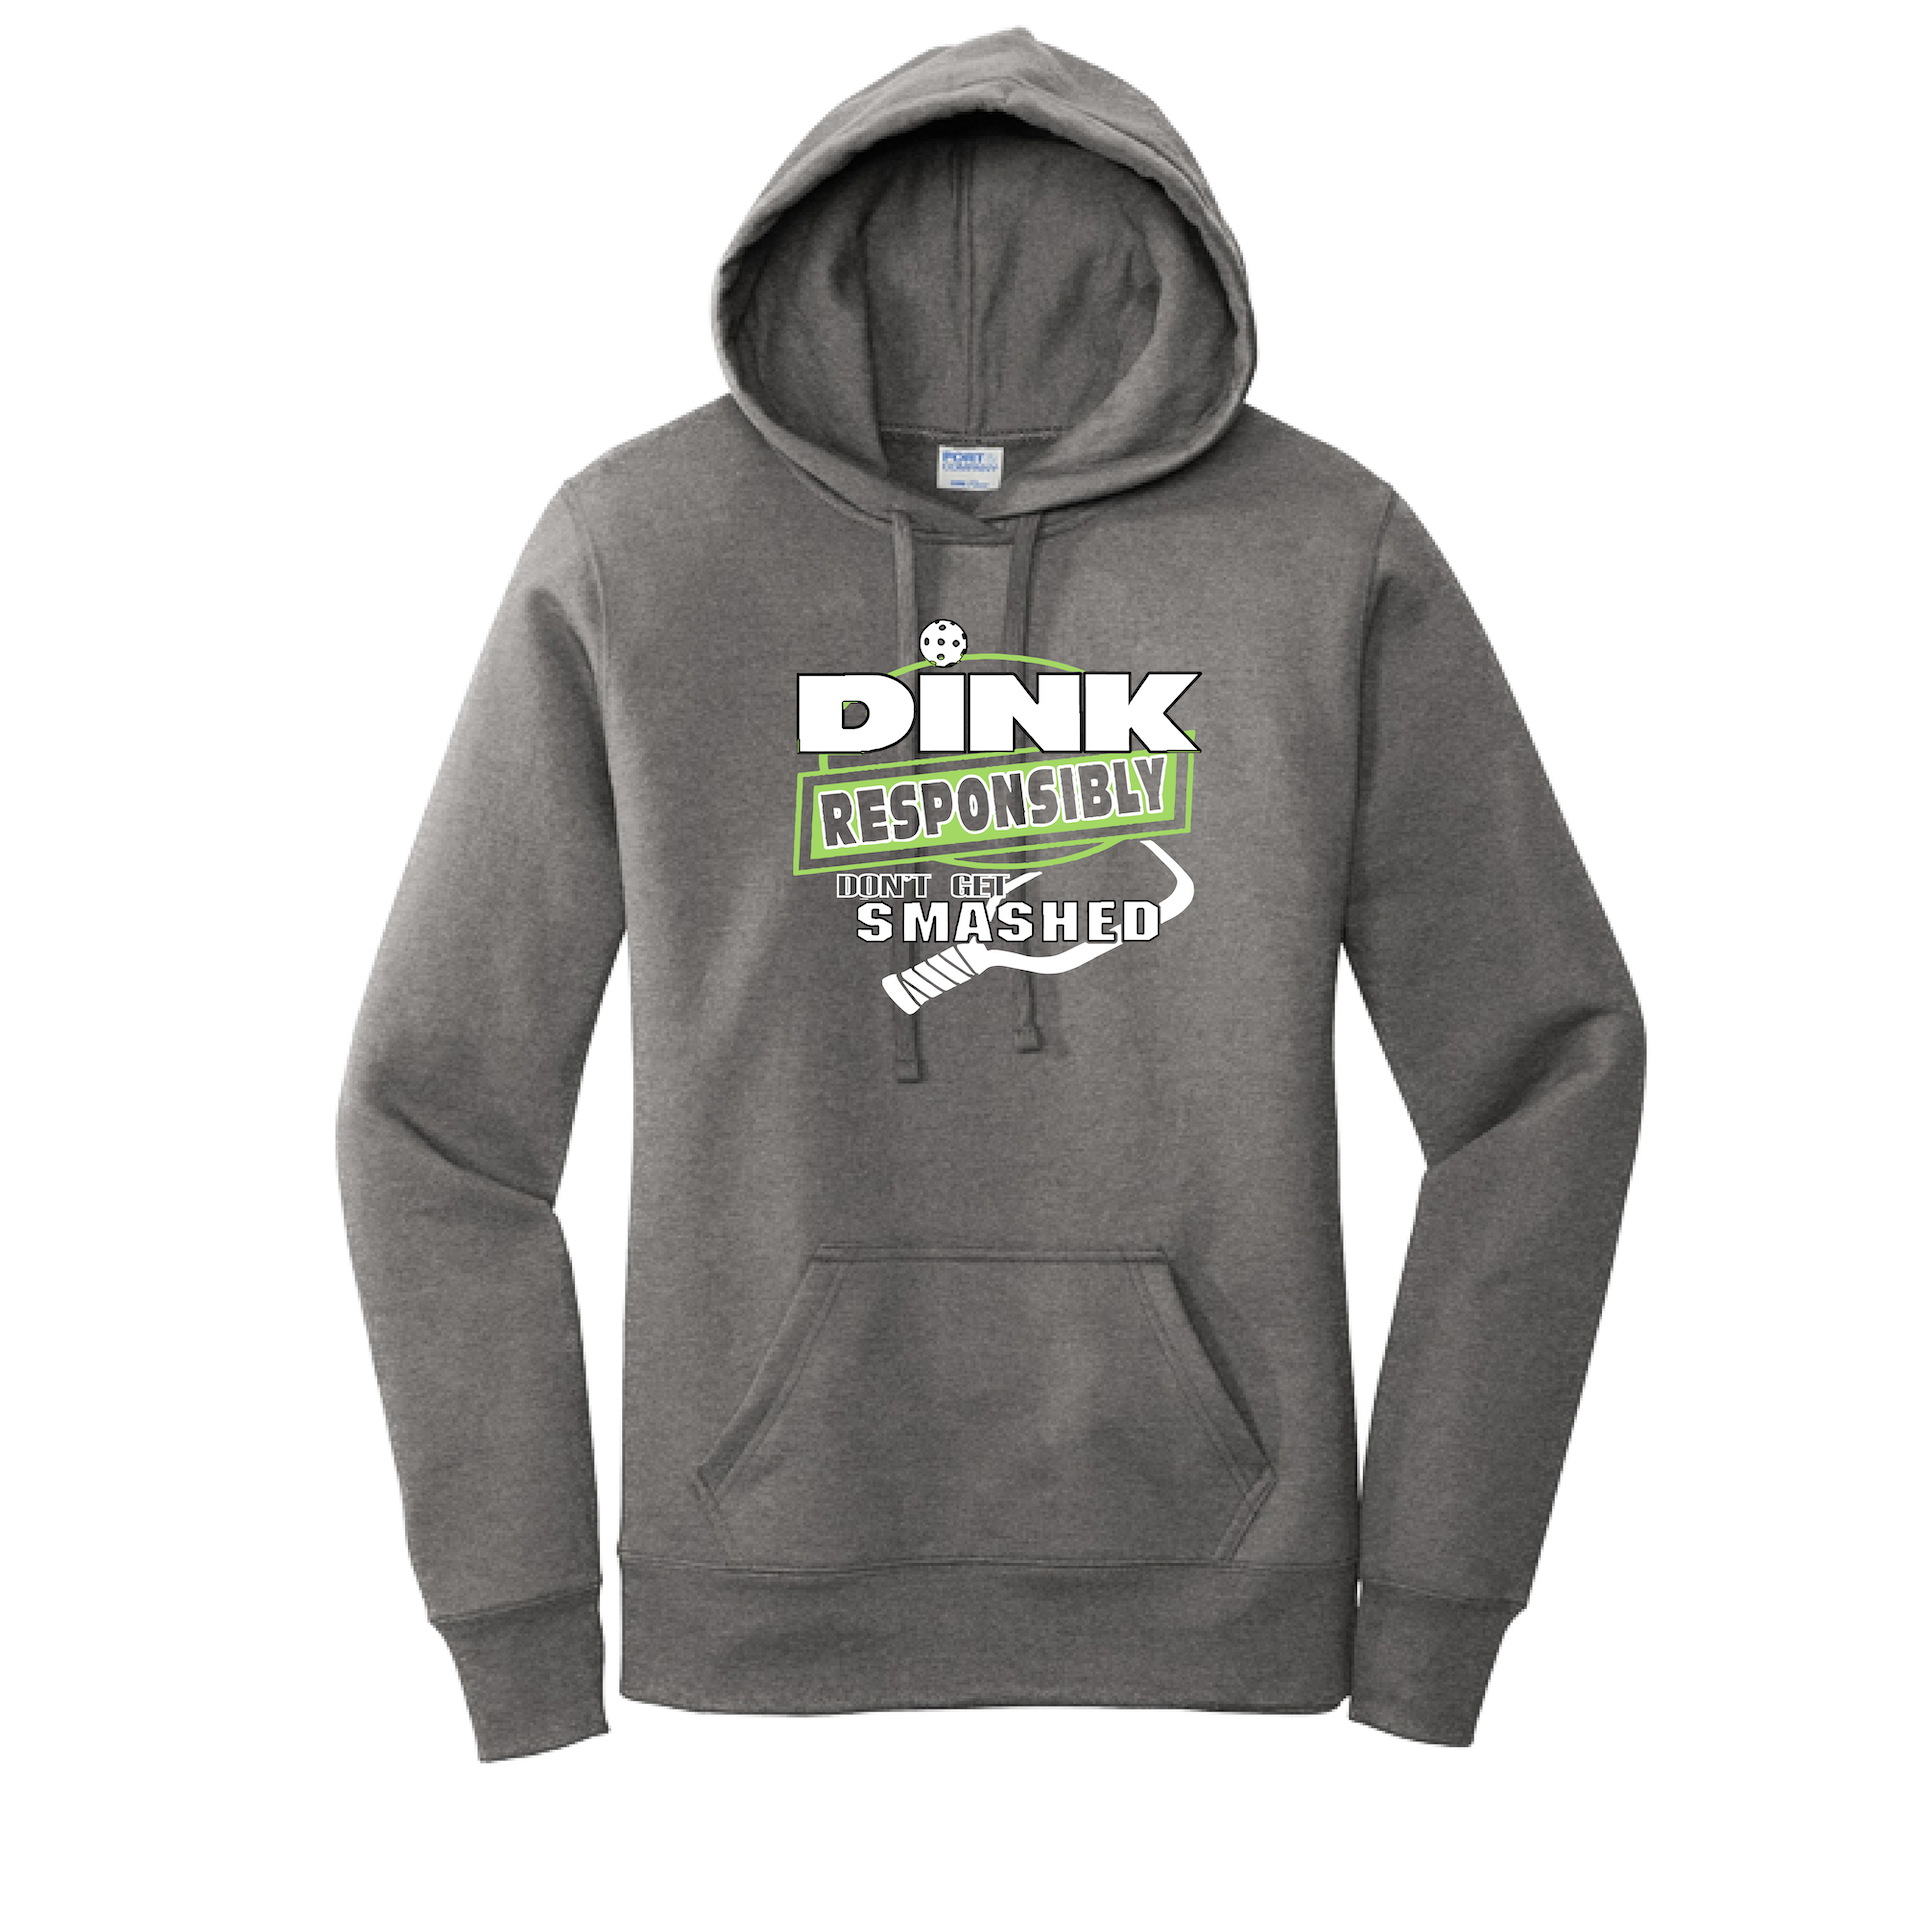 Pickleball Design: Dink Responsibly - Don't Get Smashed  Women's Hooded pullover Sweatshirt: 50/50 Cotton/Poly fleece.  Turn up the volume in this Women's Sweatshirts with its perfect mix of softness and attitude. Ultra soft lined inside with a lined hood also. This is fitted nicely for a women's figure. Front pouch pocket.